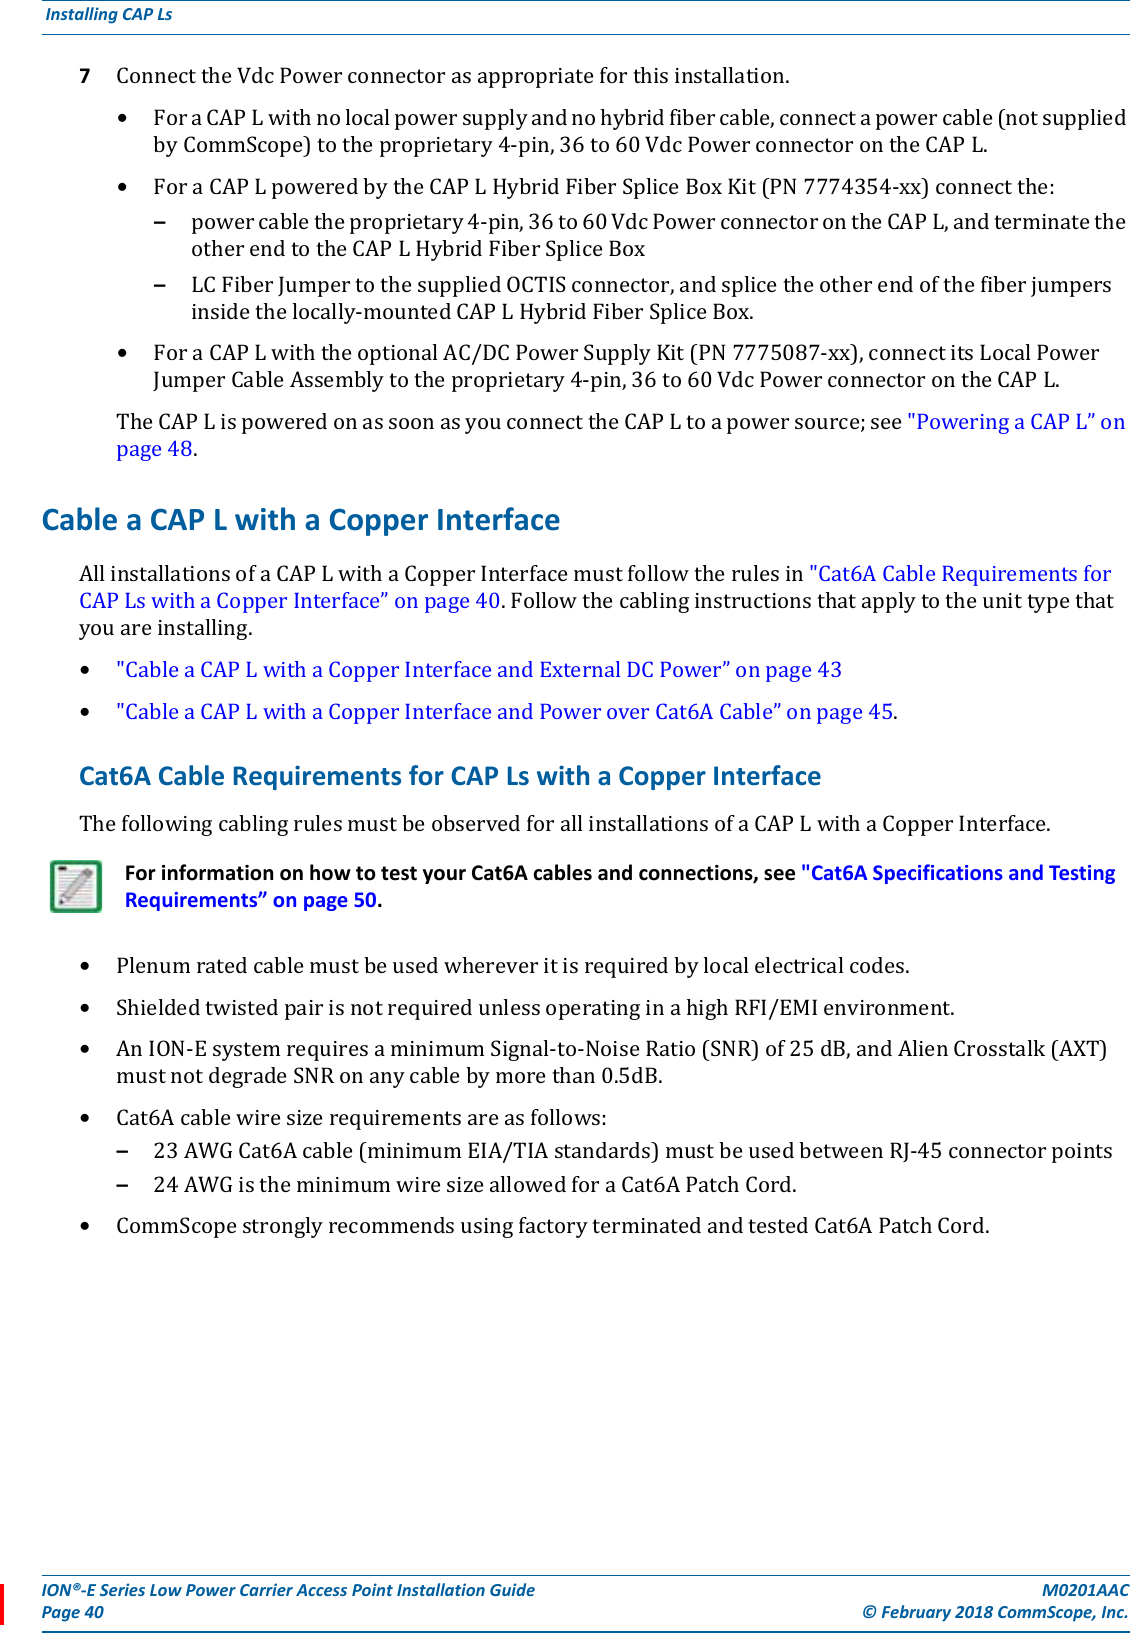 ION®-E Series Low Power Carrier Access Point Installation Guide M0201AACPage 40 © February 2018 CommScope, Inc. Installing CAP Ls  7ConnecttheVdcPowerconnectorasappropriateforthisinstallation.•ForaCAPLwithnolocalpowersupplyandnohybridfibercable,connectapowercable(notsuppliedbyCommScope)totheproprietary4-pin,36to60VdcPowerconnectorontheCAPL.•ForaCAPLpoweredbytheCAPLHybridFiberSpliceBoxKit(PN7774354-xx)connectthe:–powercabletheproprietary4-pin,36to60VdcPowerconnectorontheCAPL,andterminatetheotherendtotheCAPLHybridFiberSpliceBox–LCFiberJumpertothesuppliedOCTISconnector,andsplicetheotherendofthefiberjumpersinsidethelocally-mountedCAPLHybridFiberSpliceBox.•ForaCAPLwiththeoptionalAC/DCPowerSupplyKit(PN7775087-xx),connectitsLocalPowerJumperCableAssemblytotheproprietary4-pin,36to60VdcPowerconnectorontheCAPL.TheCAPLispoweredonassoonasyouconnecttheCAPLtoapowersource;see&quot;PoweringaCAPL”onpage48.Cable a CAP L with a Copper InterfaceAllinstallationsofaCAPLwithaCopperInterfacemustfollowtherulesin&quot;Cat6ACableRequirementsforCAPLswithaCopperInterface”onpage40.Followthecablinginstructionsthatapplytotheunittypethatyouareinstalling.•&quot;CableaCAPLwithaCopperInterfaceandExternalDCPower”onpage43•&quot;CableaCAPLwithaCopperInterfaceandPoweroverCat6ACable”onpage45.Cat6A Cable Requirements for CAP Ls with a Copper InterfaceThefollowingcablingrulesmustbeobservedforallinstallationsofaCAPLwithaCopperInterface.•Plenumratedcablemustbeusedwhereveritisrequiredbylocalelectricalcodes.•ShieldedtwistedpairisnotrequiredunlessoperatinginahighRFI/EMIenvironment.•AnION-EsystemrequiresaminimumSignal-to-NoiseRatio(SNR)of25dB,andAlienCrosstalk(AXT)mustnotdegradeSNRonanycablebymorethan0.5dB.•Cat6Acablewiresizerequirementsareasfollows:–23AWGCat6Acable(minimumEIA/TIAstandards)mustbeusedbetweenRJ-45connectorpoints–24AWGistheminimumwiresizeallowedforaCat6APatchCord.•CommScopestronglyrecommendsusingfactoryterminatedandtestedCat6APatchCord.For information on how to test your Cat6A cables and connections, see &quot;Cat6A Specifications and Testing Requirements” on page 50.